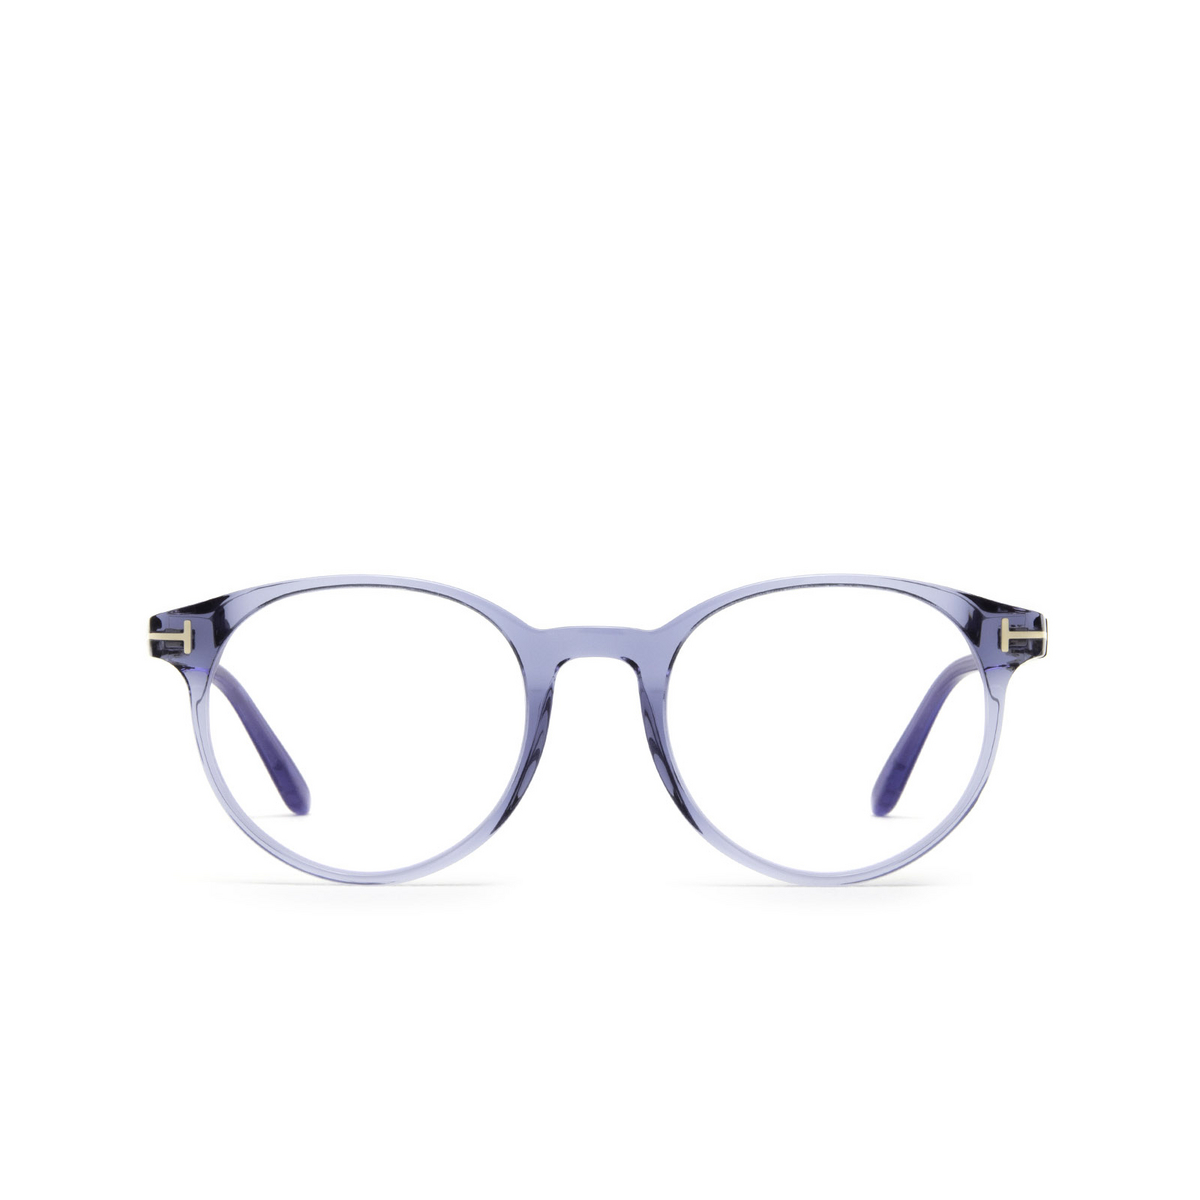 Tom Ford® Round Eyeglasses: FT5695-B color Blue 090 - front view.